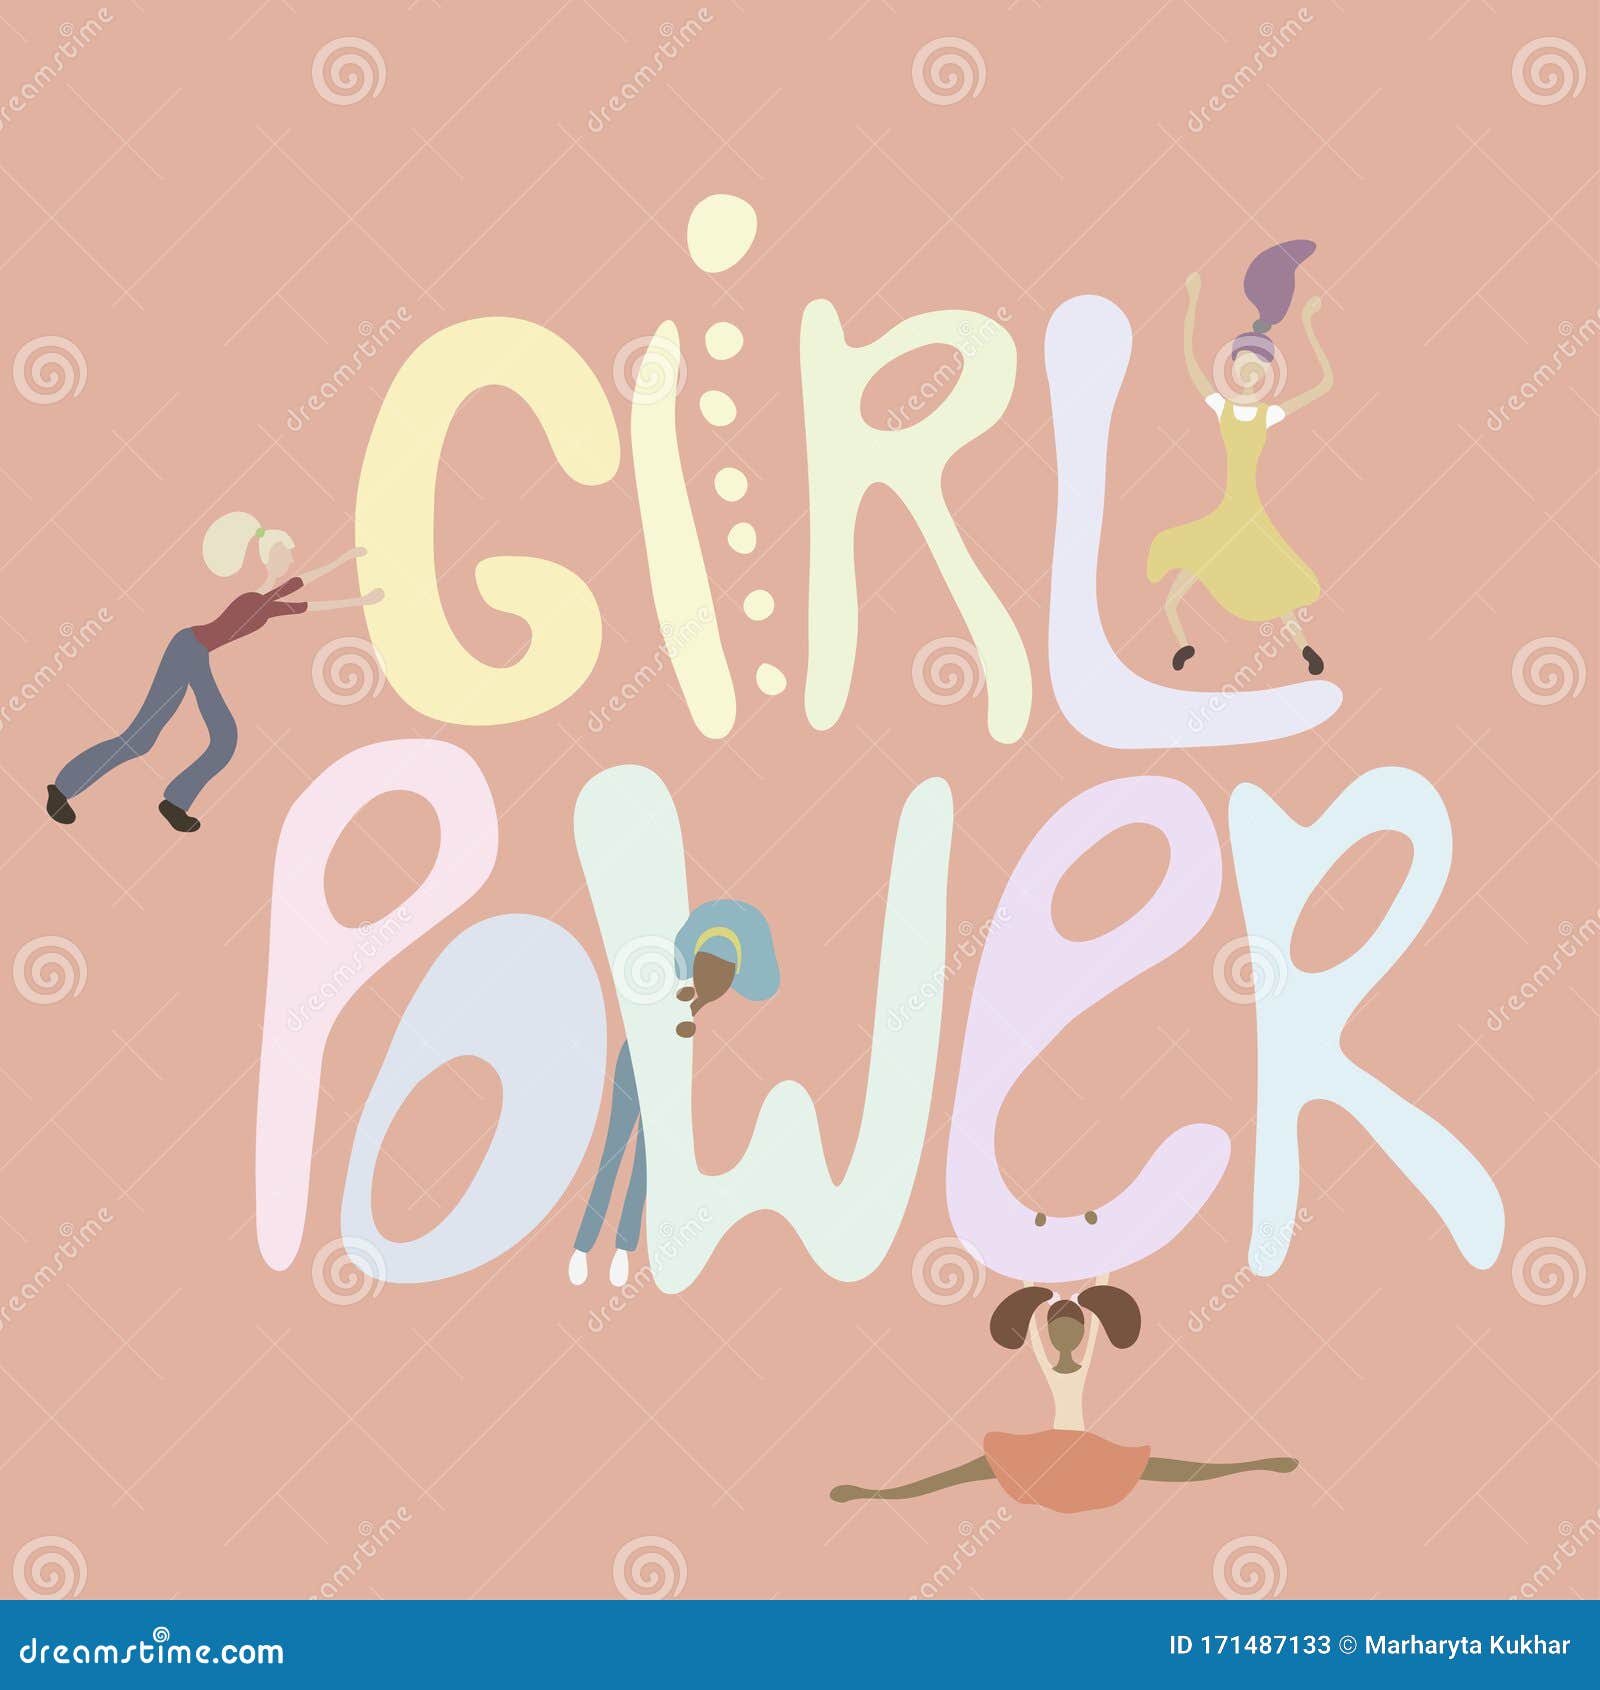 Girl Power - Unique Hand Drawn Inspirational Feminist Quote. Women  Characters Activities Stock Vector - Illustration of female, card: 171487133